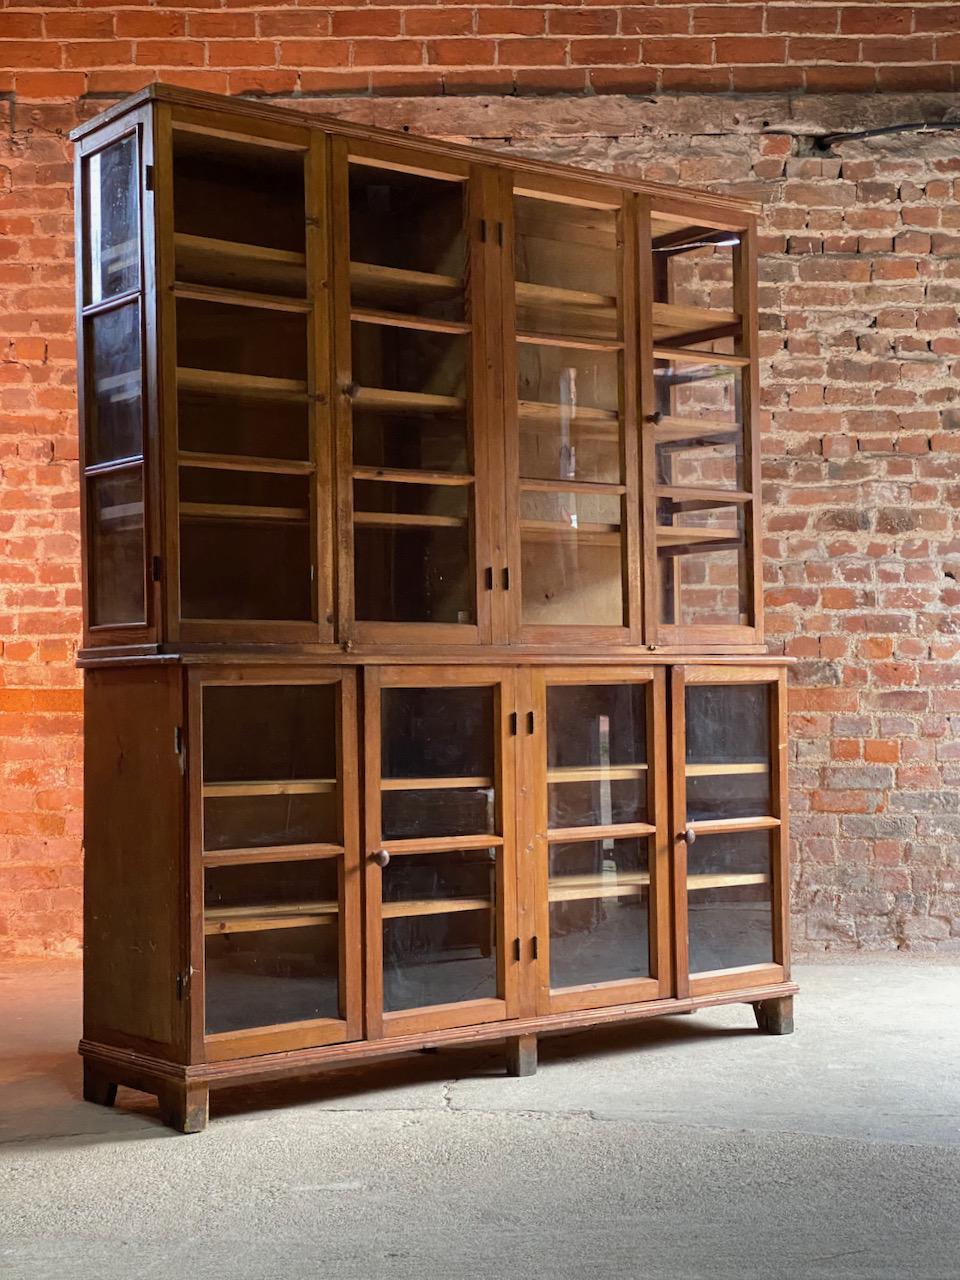 Apothecary No. 8

Large Apothecary Haberdashery display cabinet circa 1930s number 8

Apothecary / pharmacy / chemist / shop display / restaurant  cabinet circa 1930s

Magnificent early twentieth century large Apothecary Pharmacy beech display